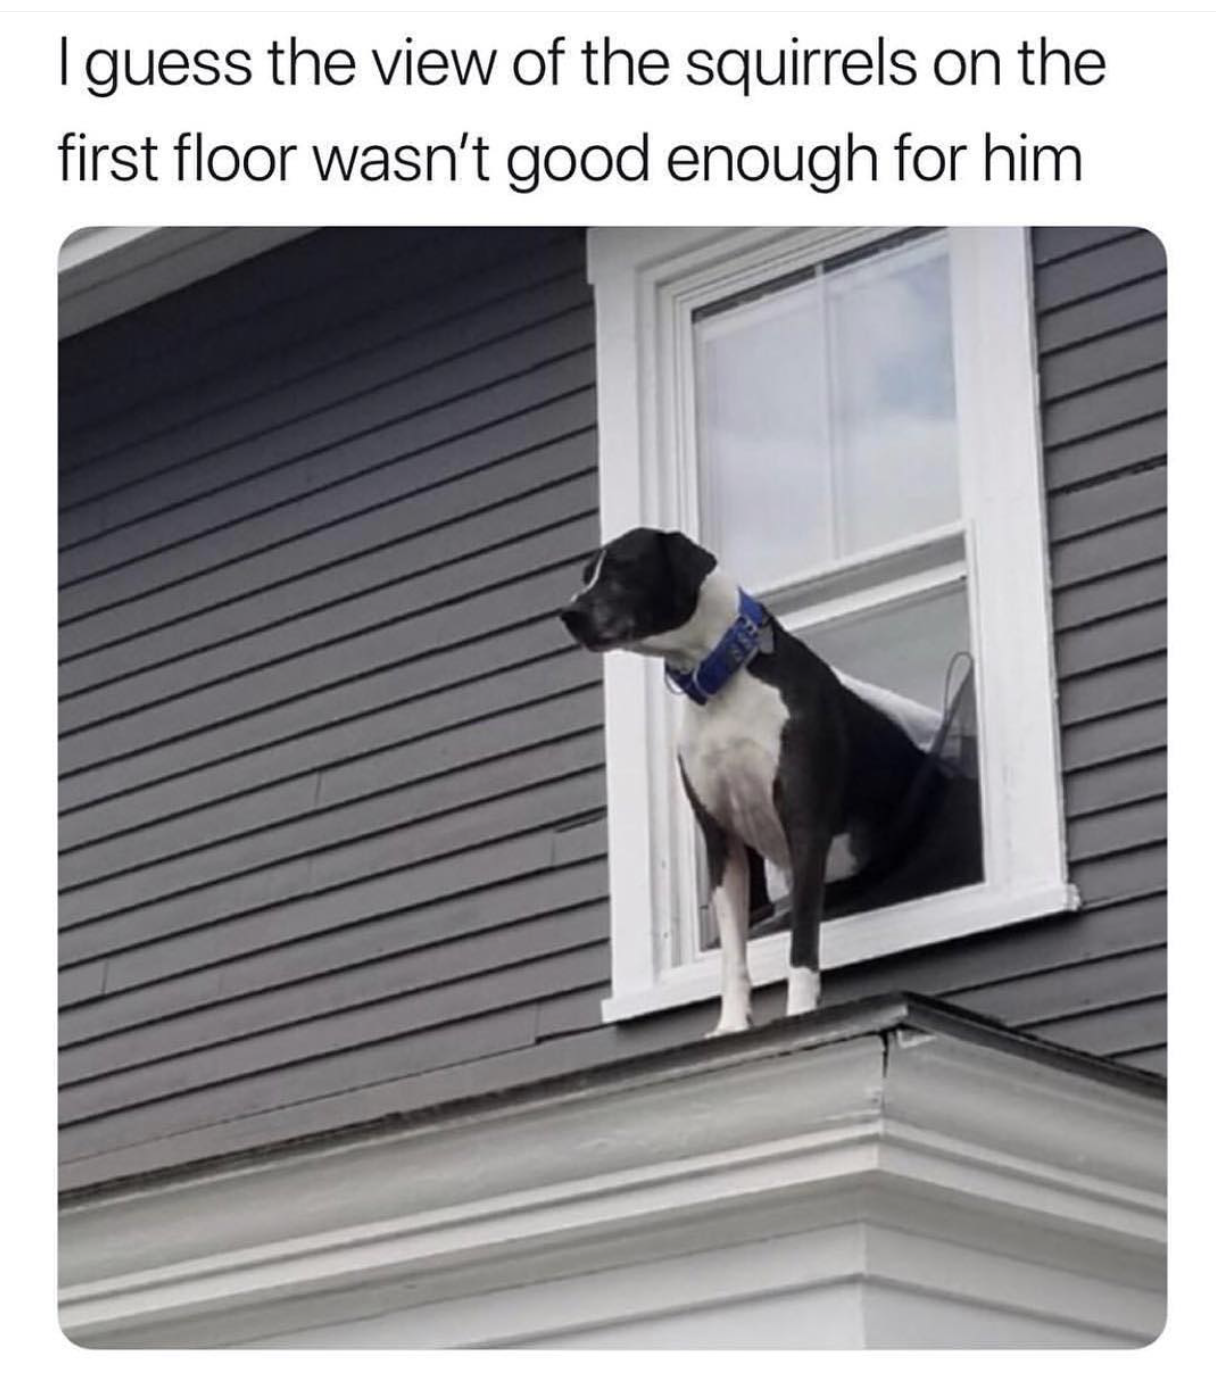 dog - I guess the view of the squirrels on the first floor wasn't good enough for him